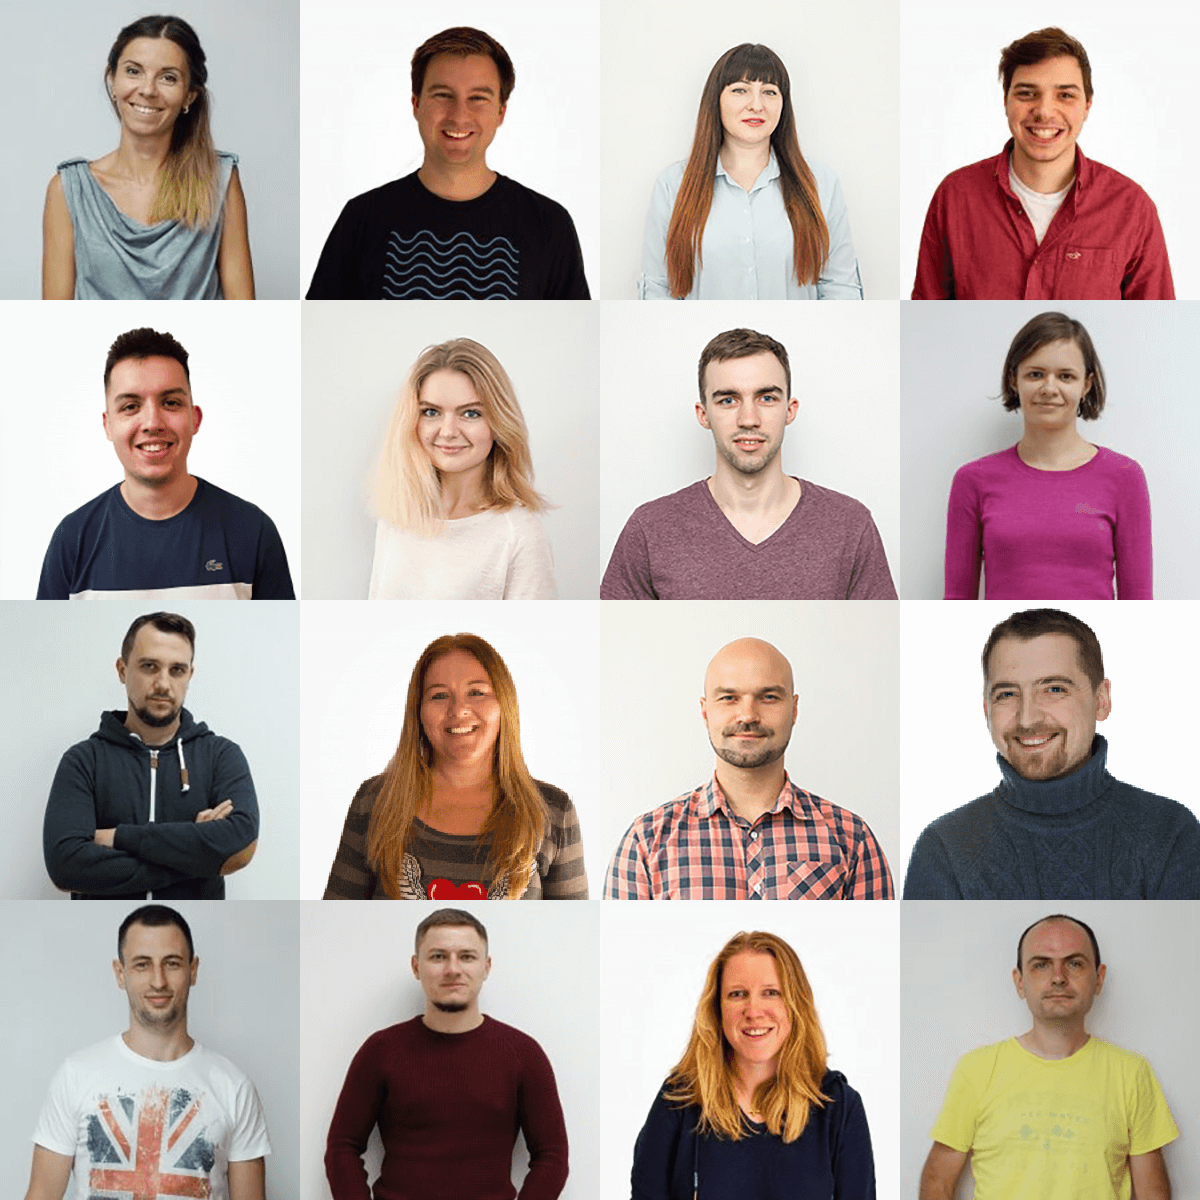 New Faces at BrightLocal in 2018